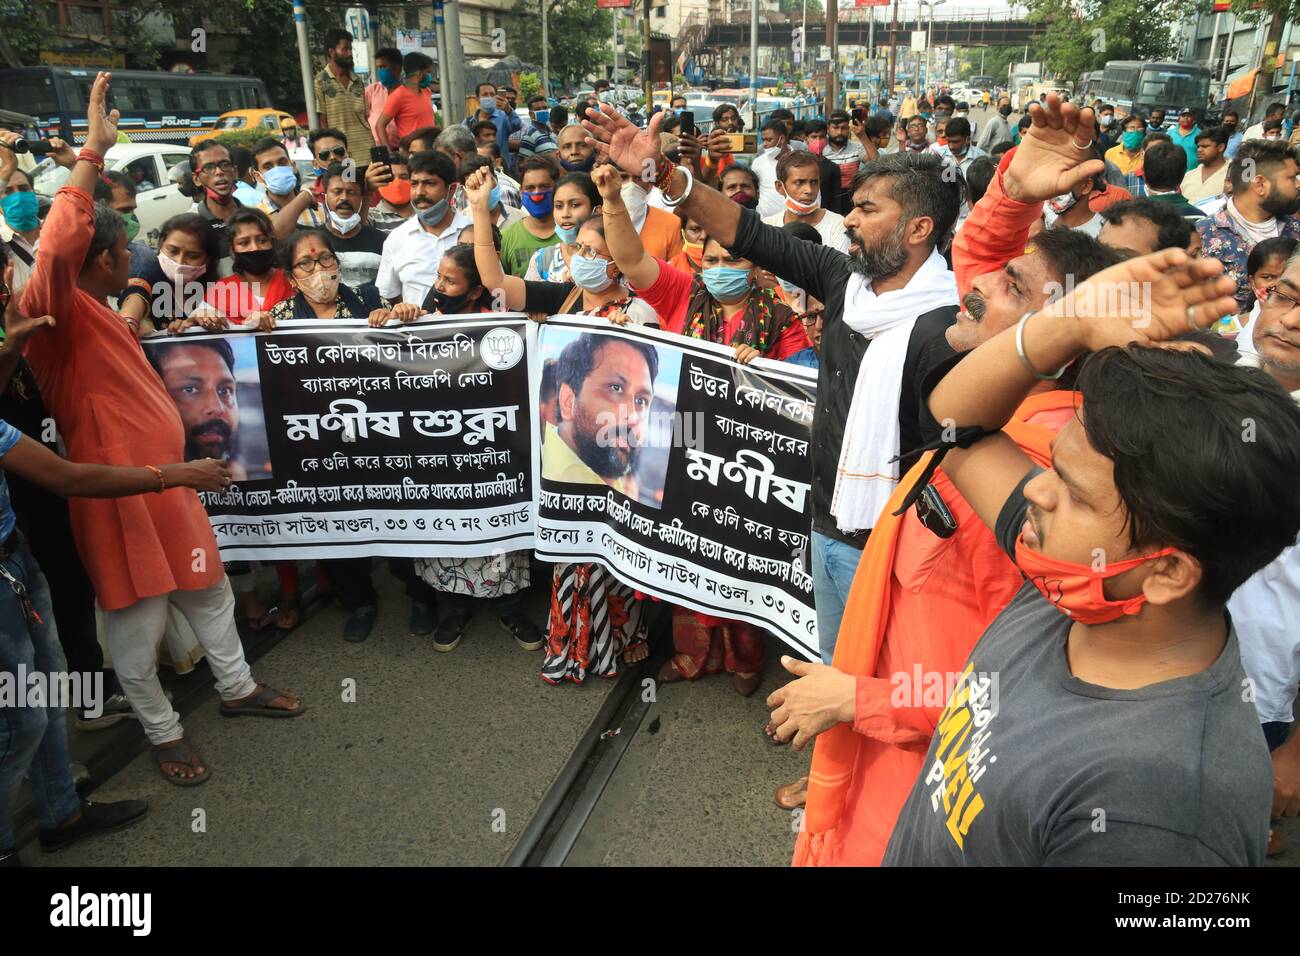 BJP supporters agitation in front of NRS Hospital in Kolkata, India on October 5, 2020. BJP leader Manish Shukla was shot dead on Sunday evening, about 20 km from north Kolkata, when he was speaking with some locals and party workers near a local police station. The BJP has called for a 12-hour (shutdown) in the Barrackpore area today, blaming the ruling Trinamool Congress for the killing. The Trinamool Congress has denied the charge and blamed the incident on an internal feud within the BJP. (Photo by Dipa Chakraborty/Pacific Press/Sipa USA) Stock Photo